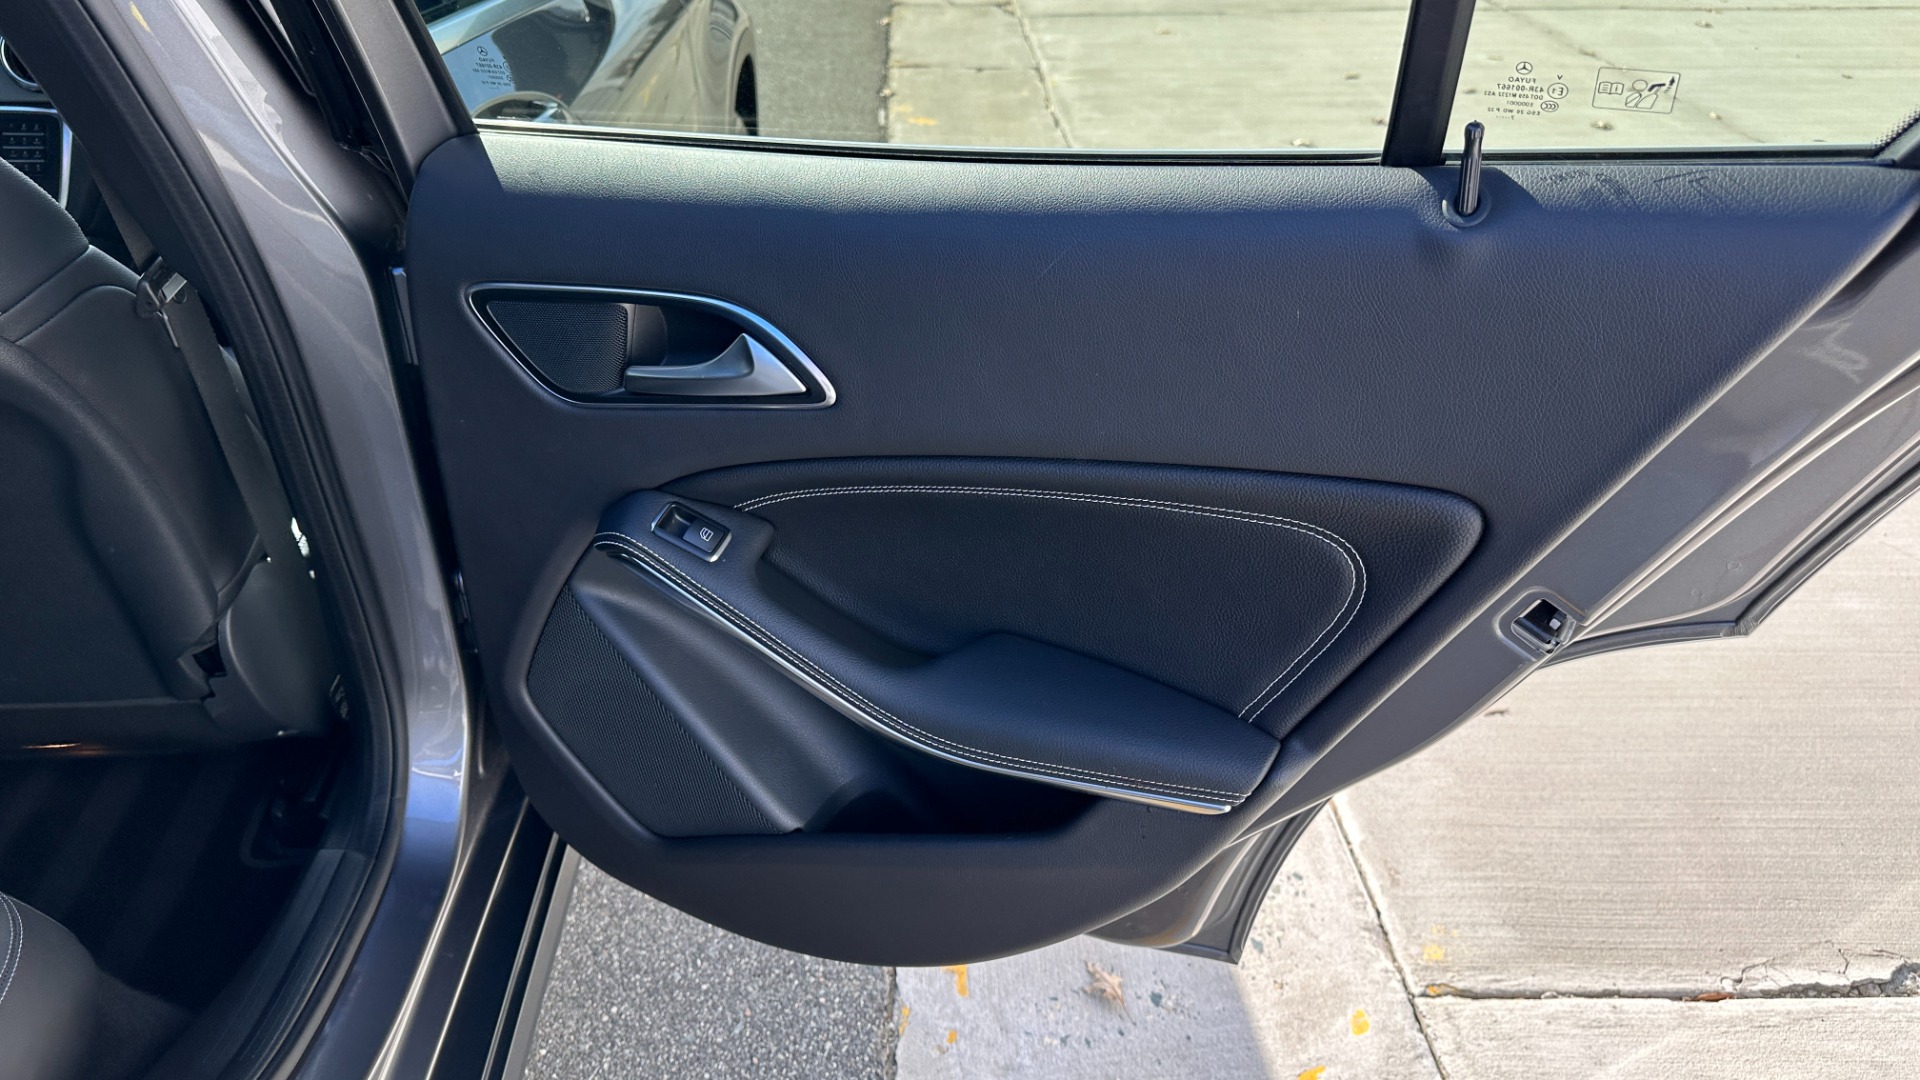 Used 2018 Mercedes-Benz GLA GLA 250 / PANORAMIC SUNROOF / BLIND SPOT ASSIST / HEATED FRONT SEATS for sale $27,999 at Formula Imports in Charlotte NC 28227 25